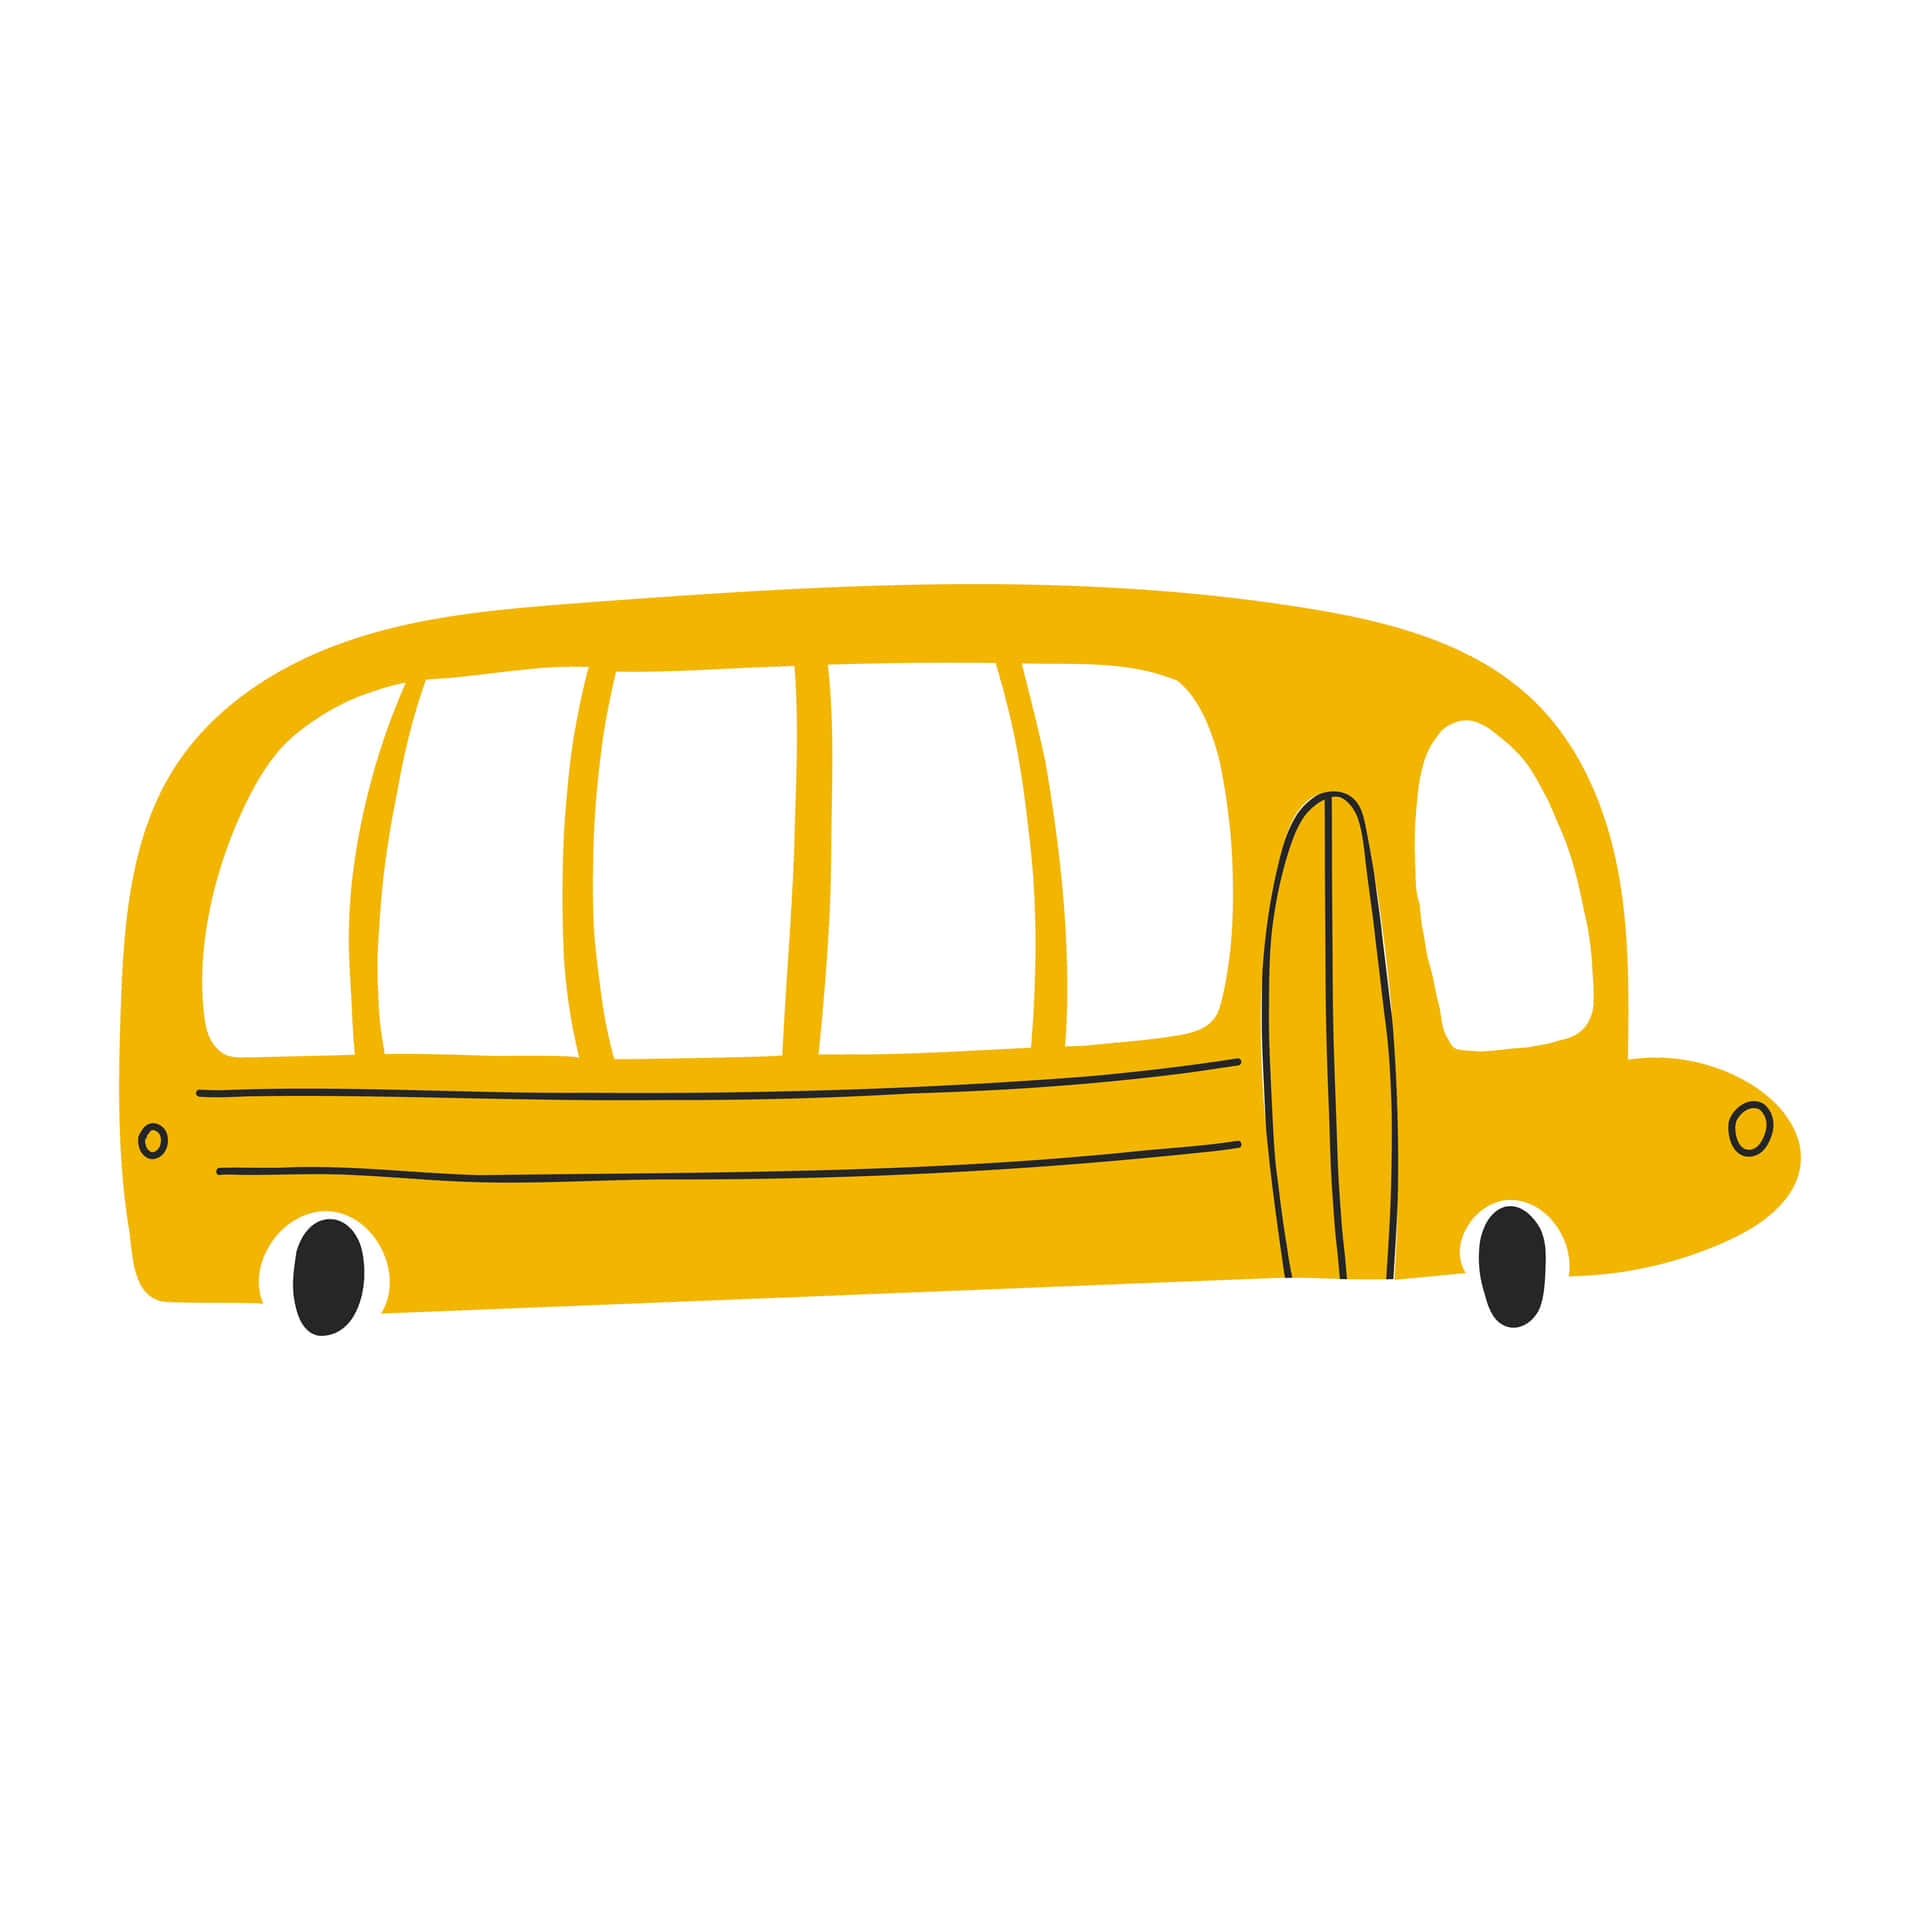 Yellow School Bus Parked Ready for a New School Day Wallpaper